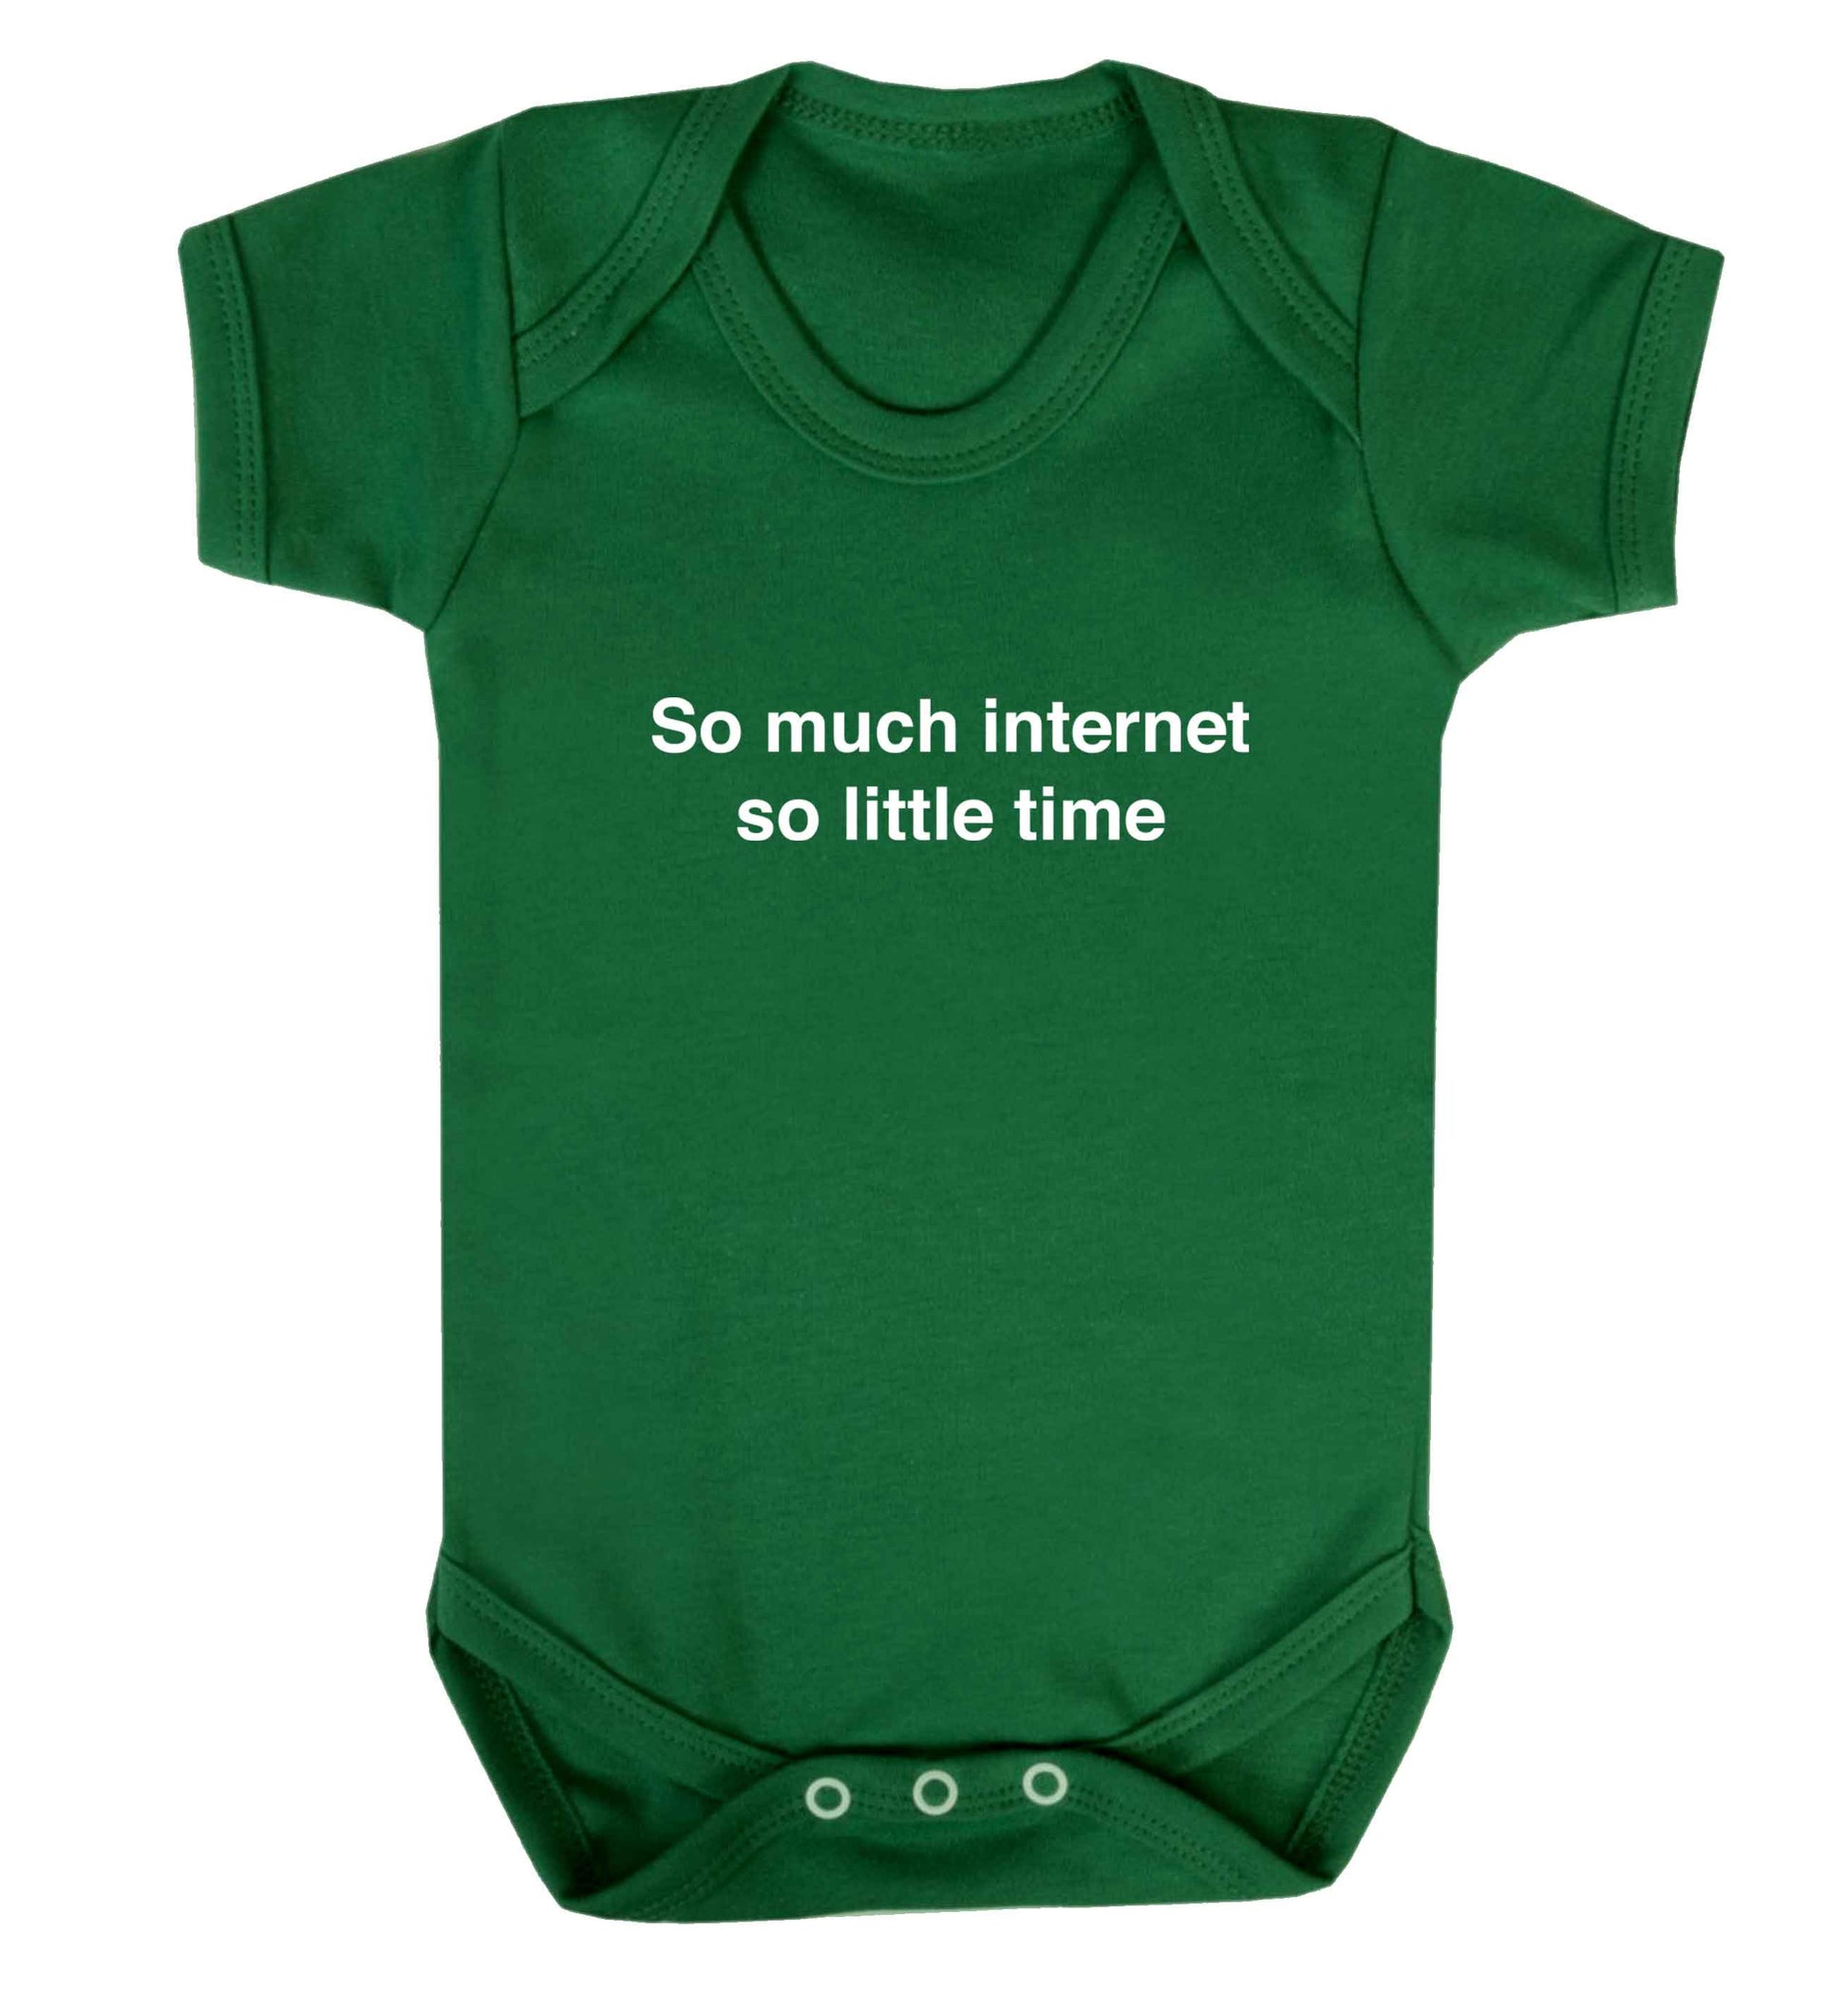 So much internet so little time baby vest green 18-24 months